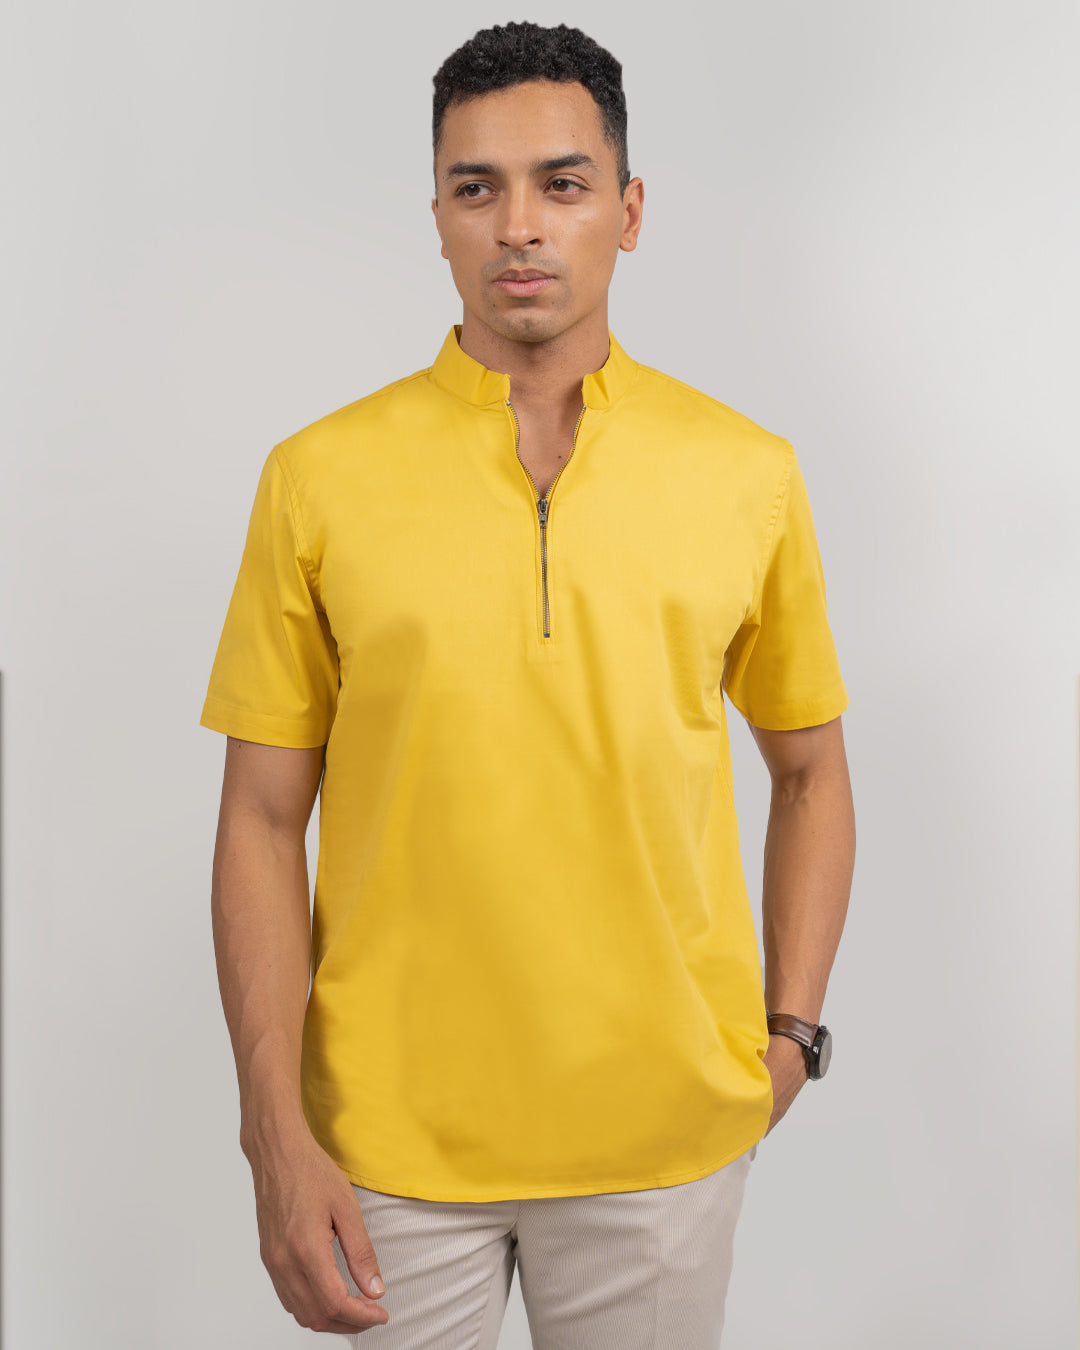 Modern stylish yellow zipper front shirt for men, Stylish and functional zipper front shirt for men, combining modern design with comfort